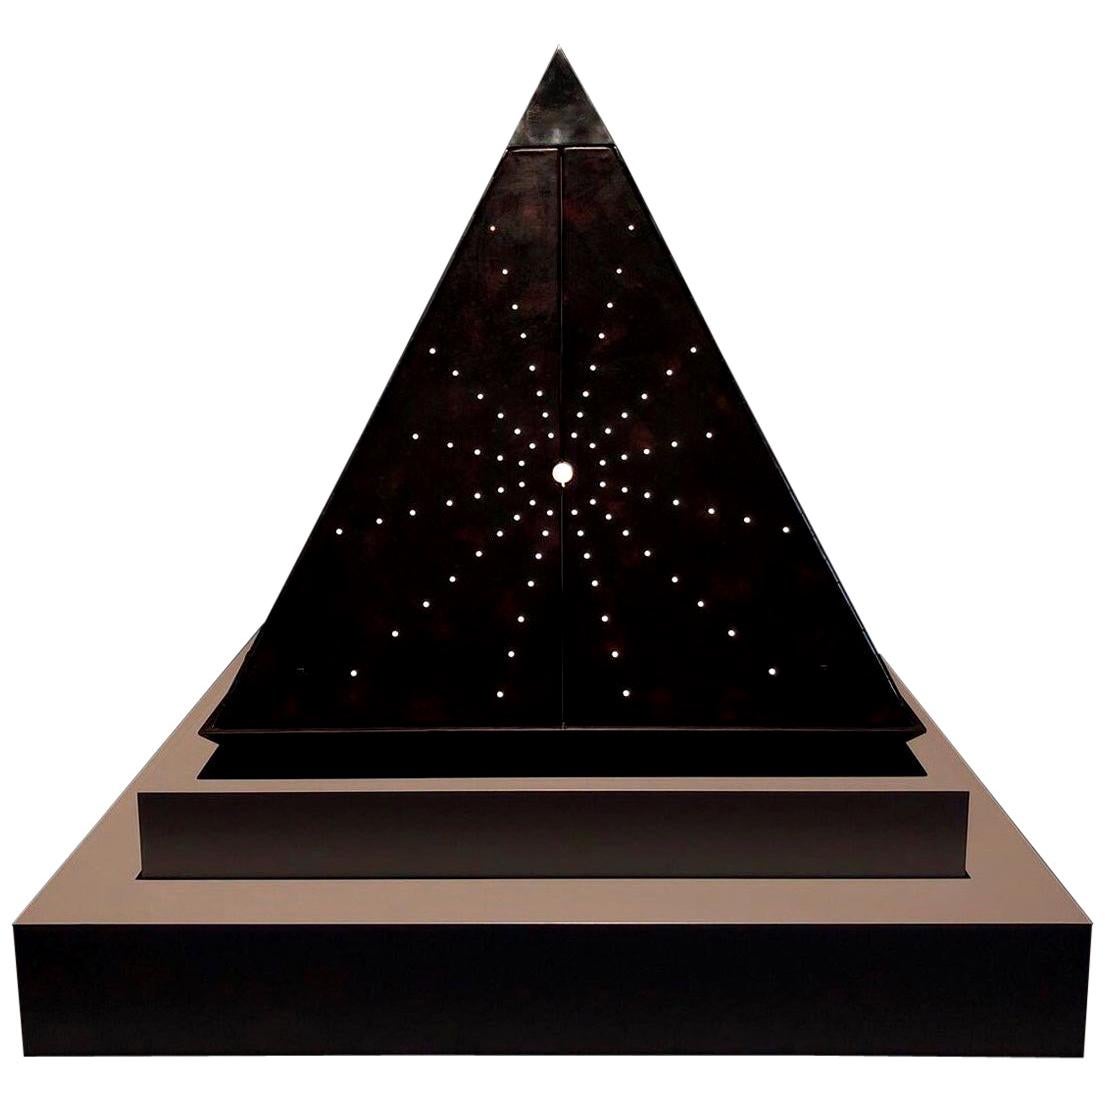 Oscar Tusquets Contemporary Leather Starry Pyramid Limited Edition For Sale